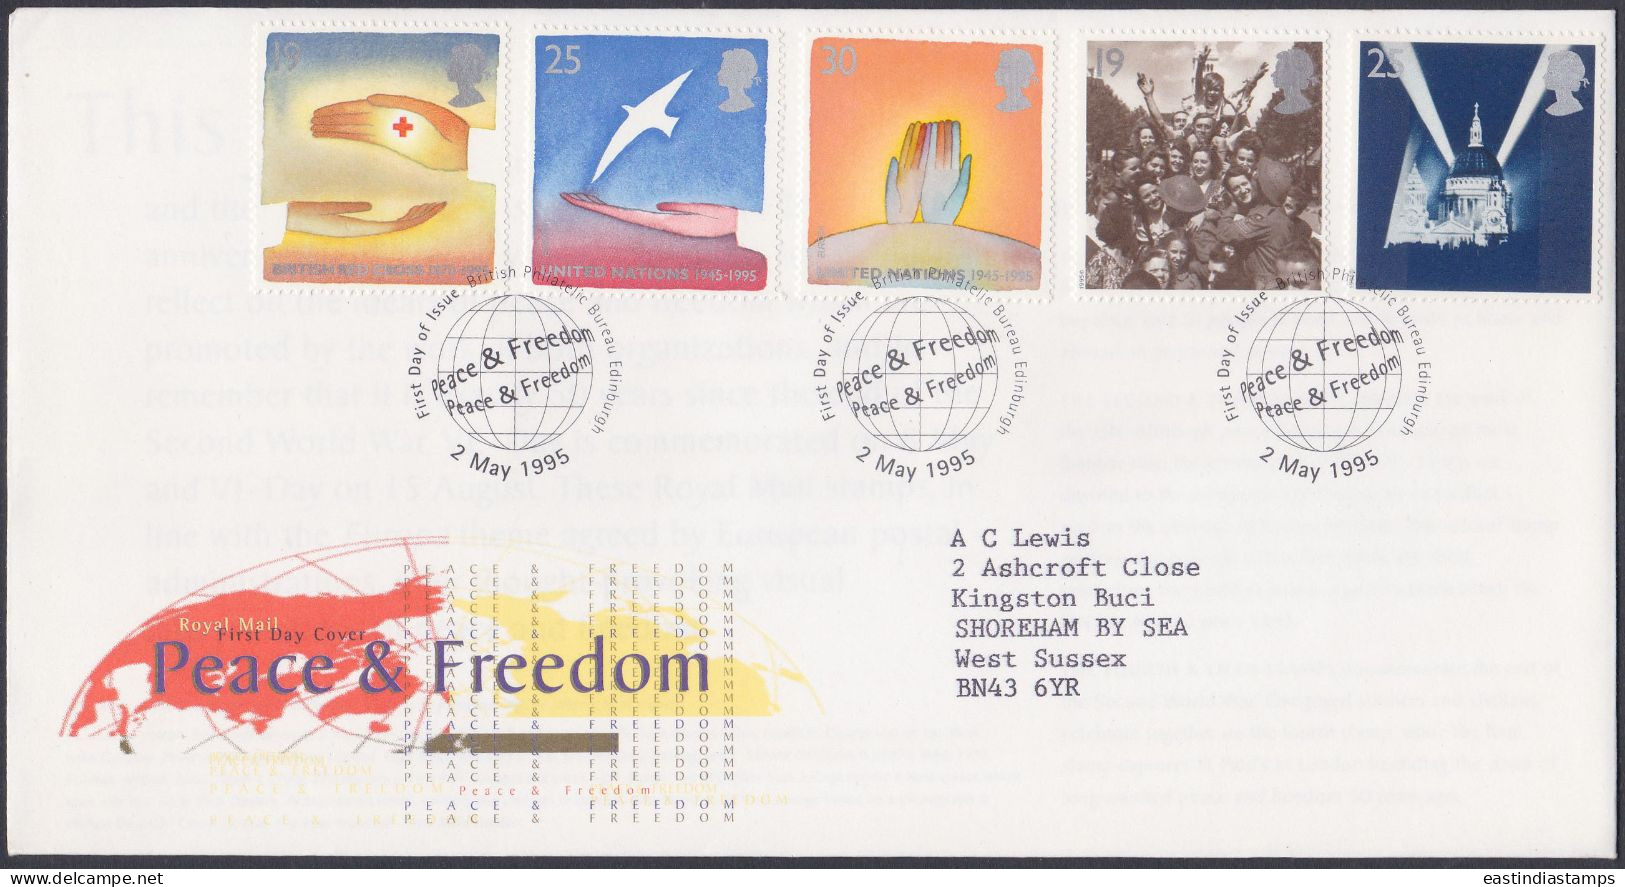 GB Great Britain 1995 FDC Peace & Freedom, United Nations, British Red Cross, Bird, Pictorial Postmark, First Day Cover - Covers & Documents